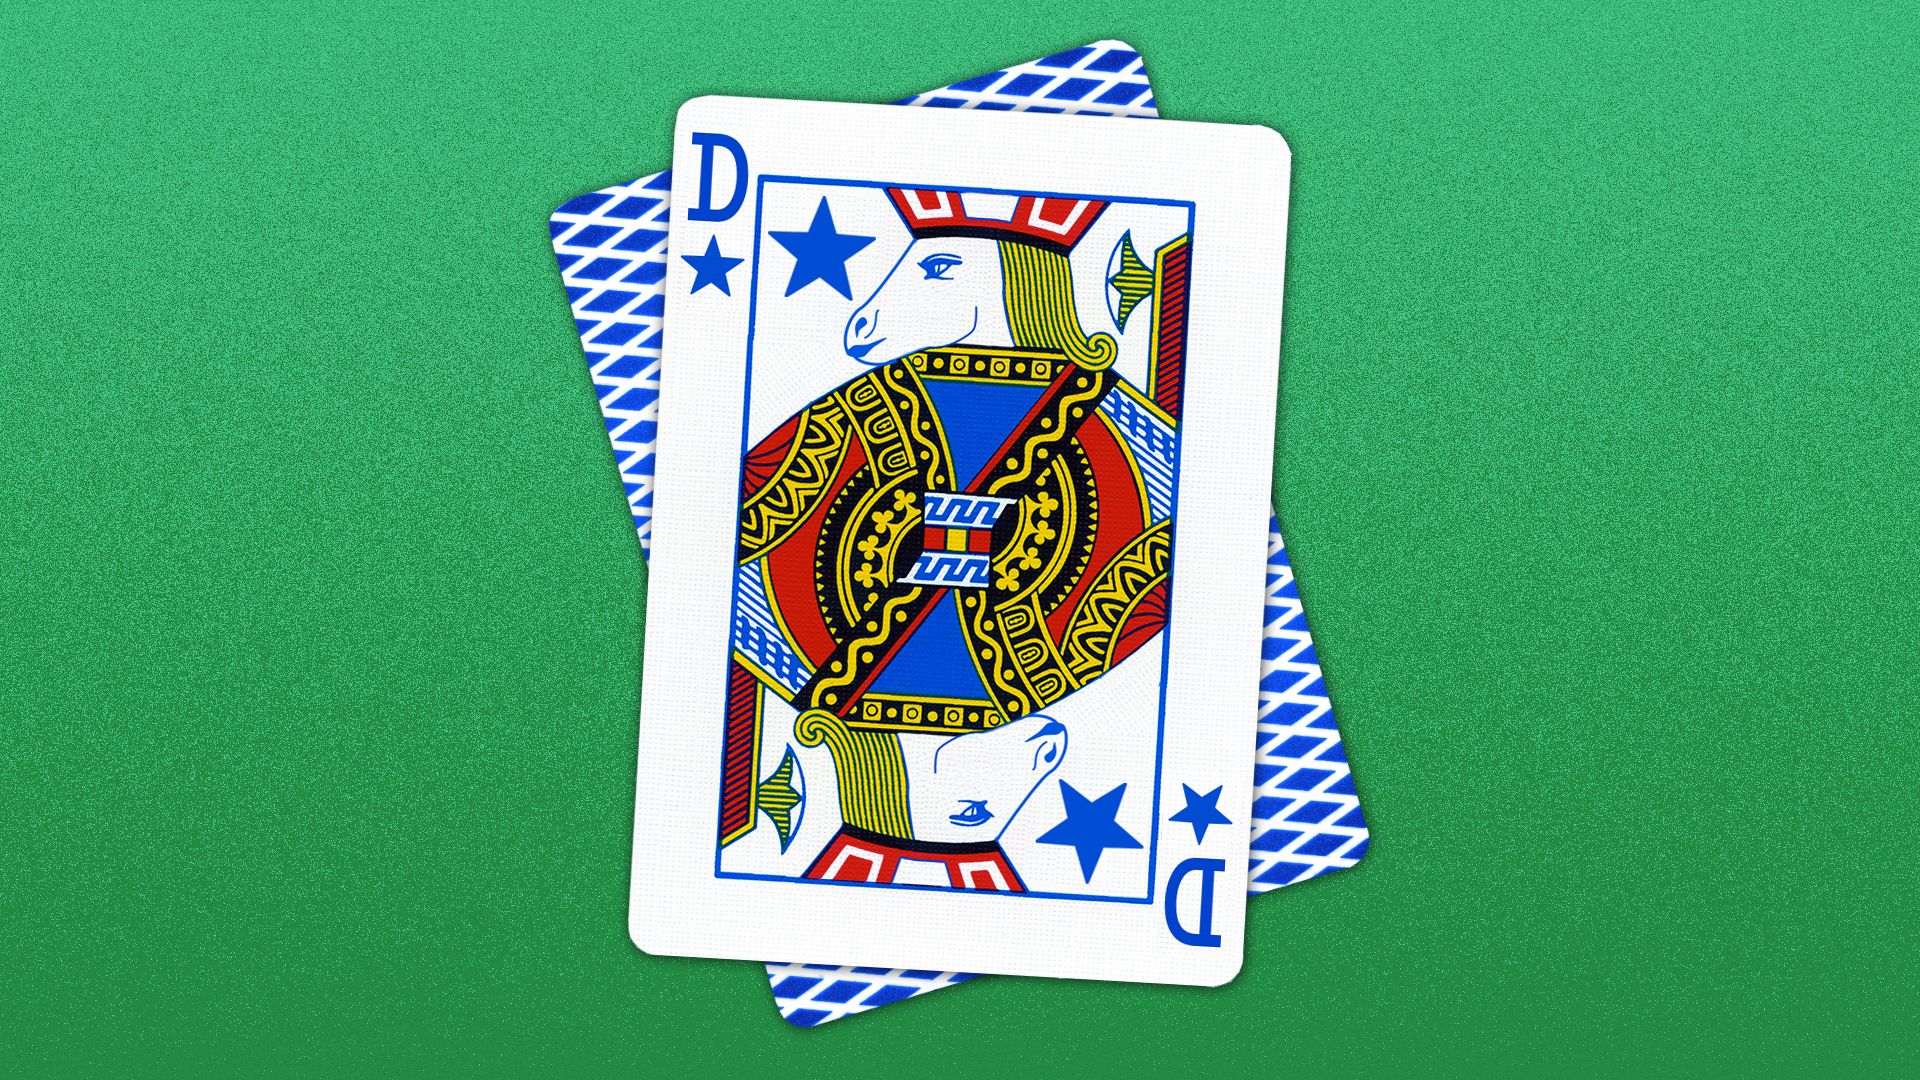 Illustration of a face playing card with a donkey as the character. The letter "D" is in place of the card number and a star is in place of the suite.